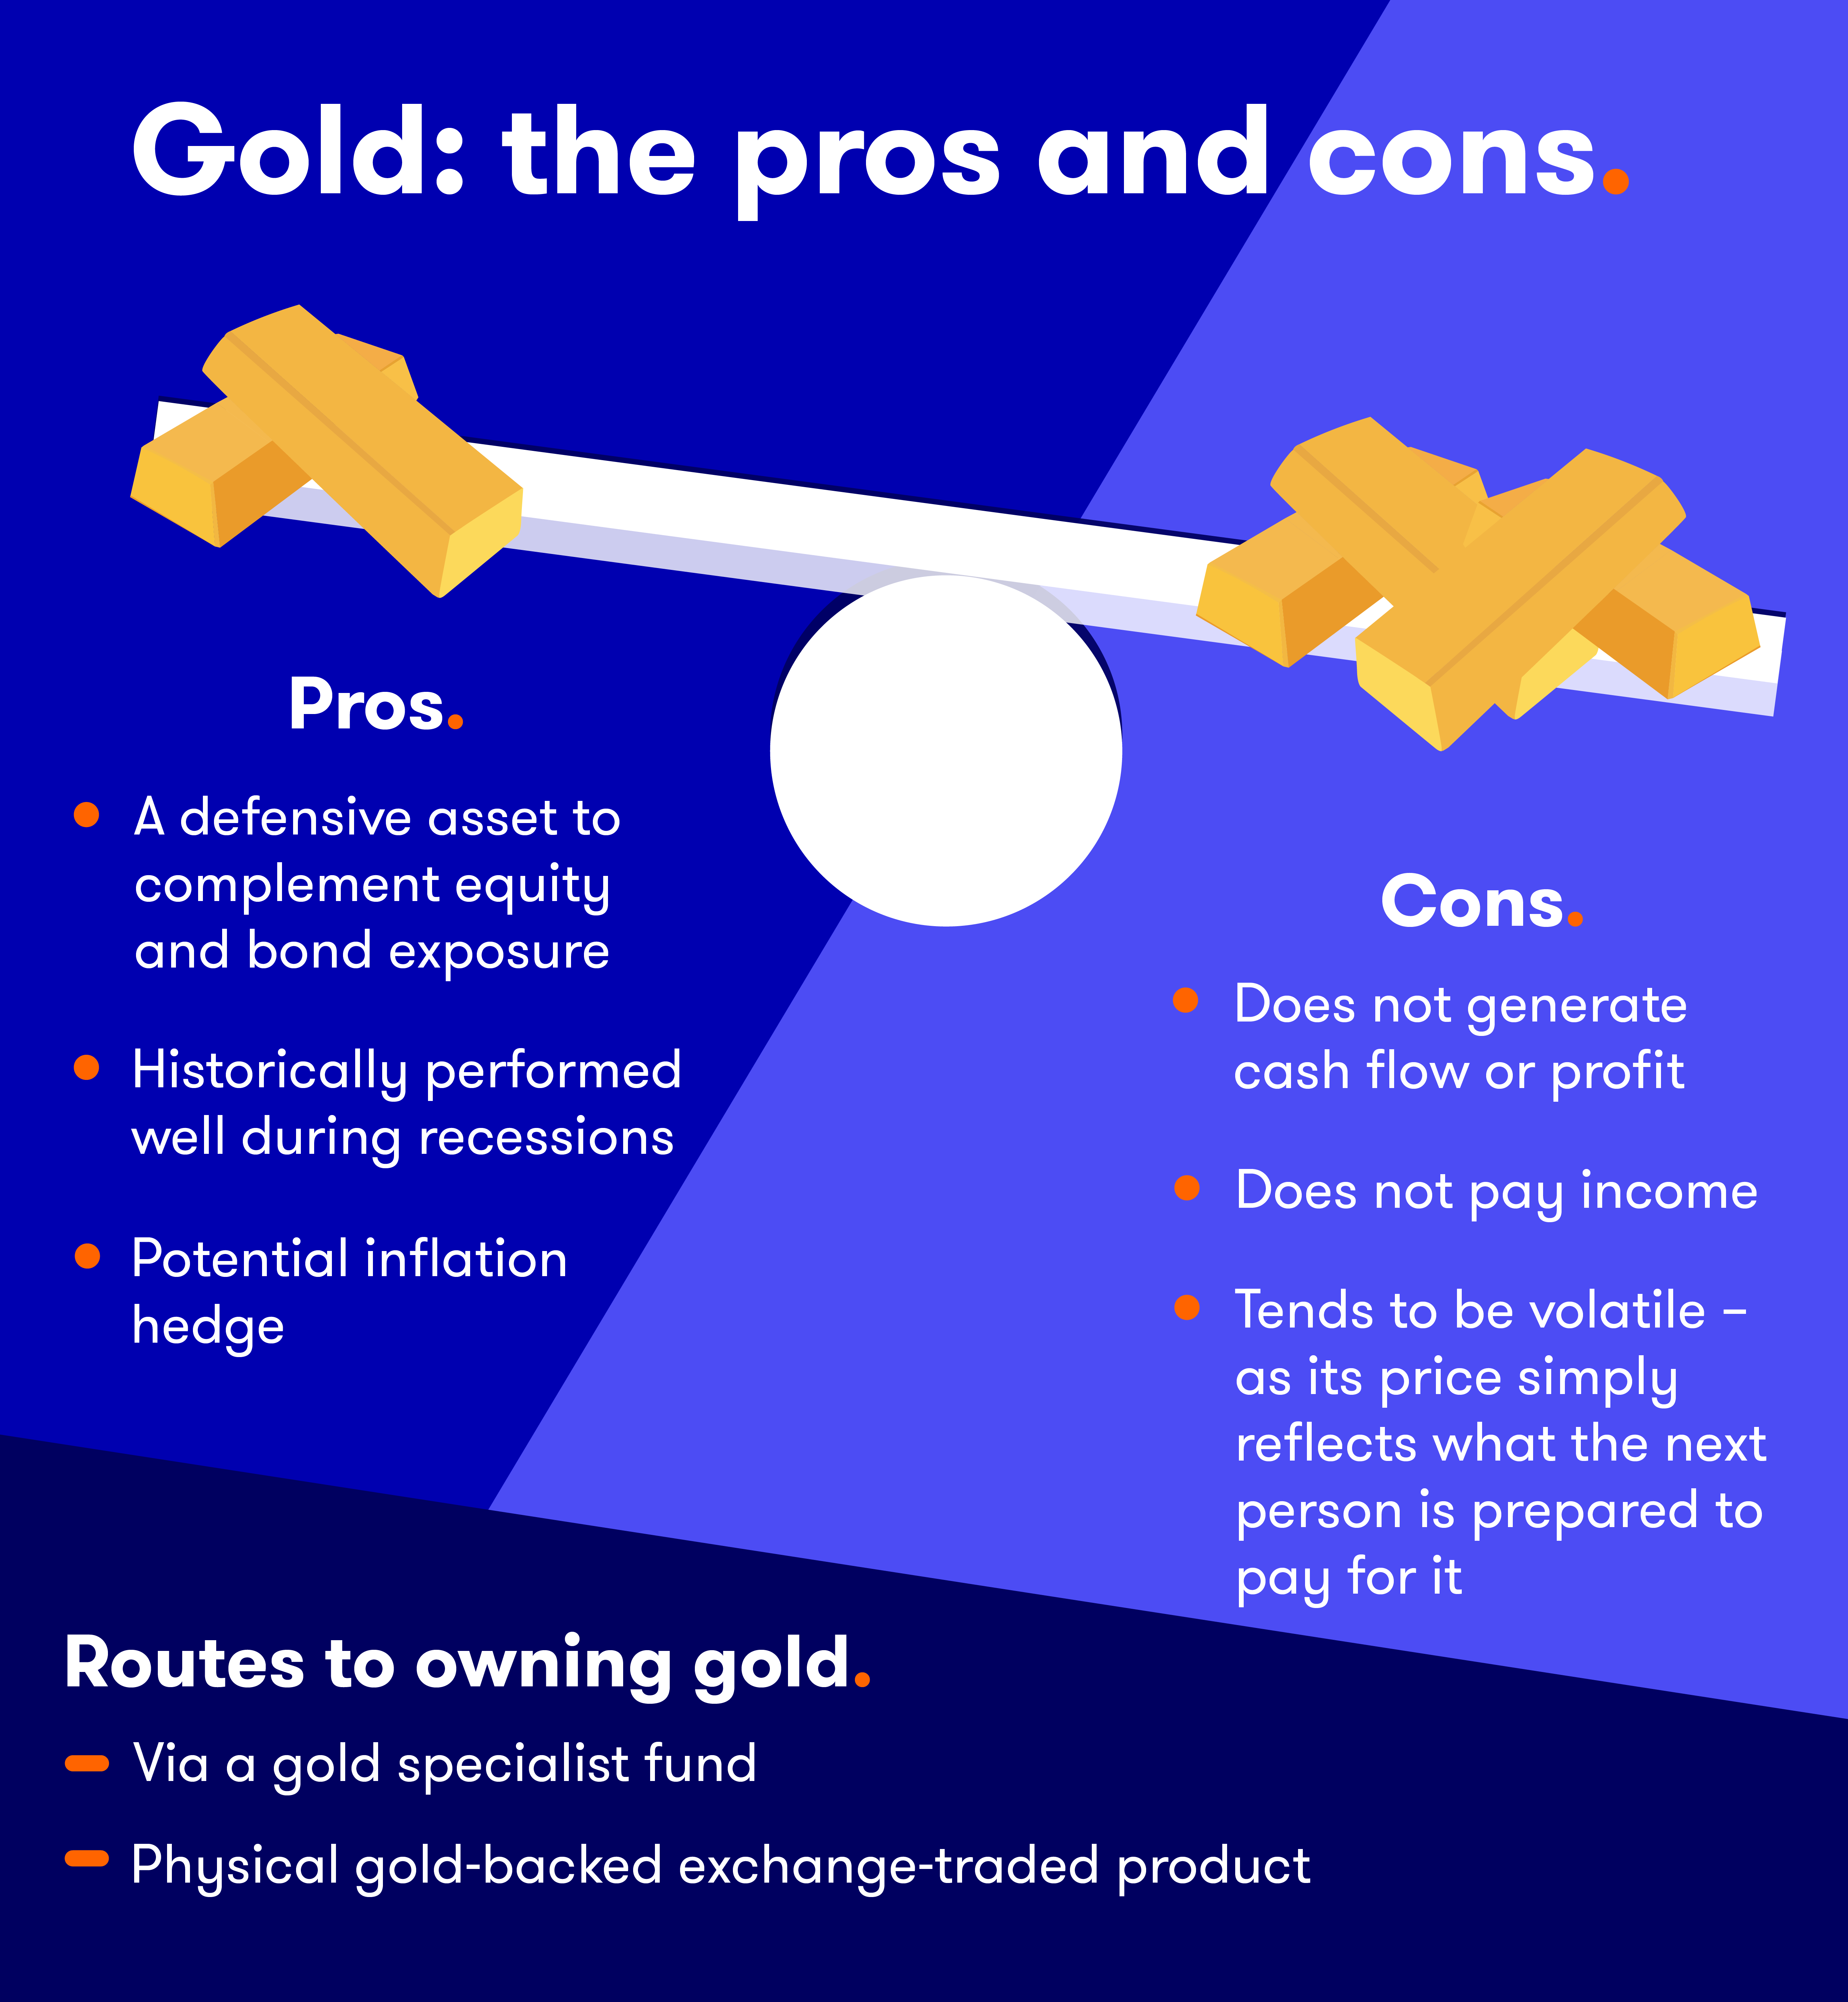 Gold pros vs cons infographic